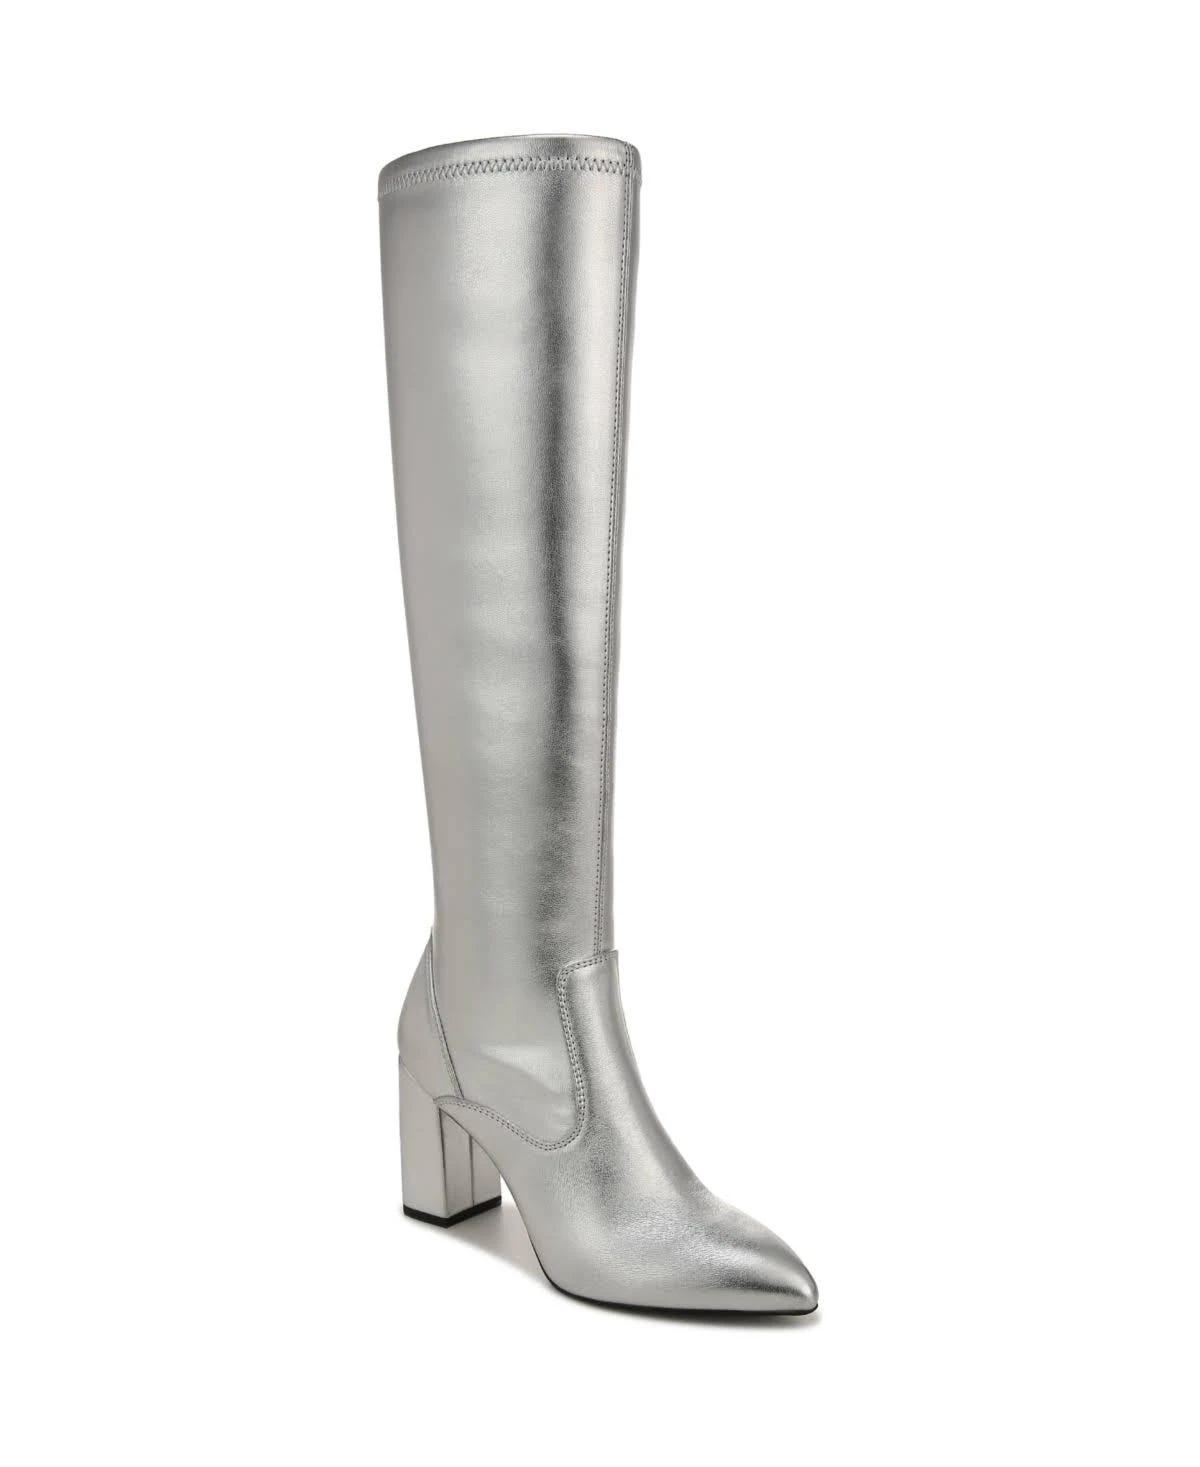 Stylish Knee-High Boots with Eco-Friendly Comfort | Image